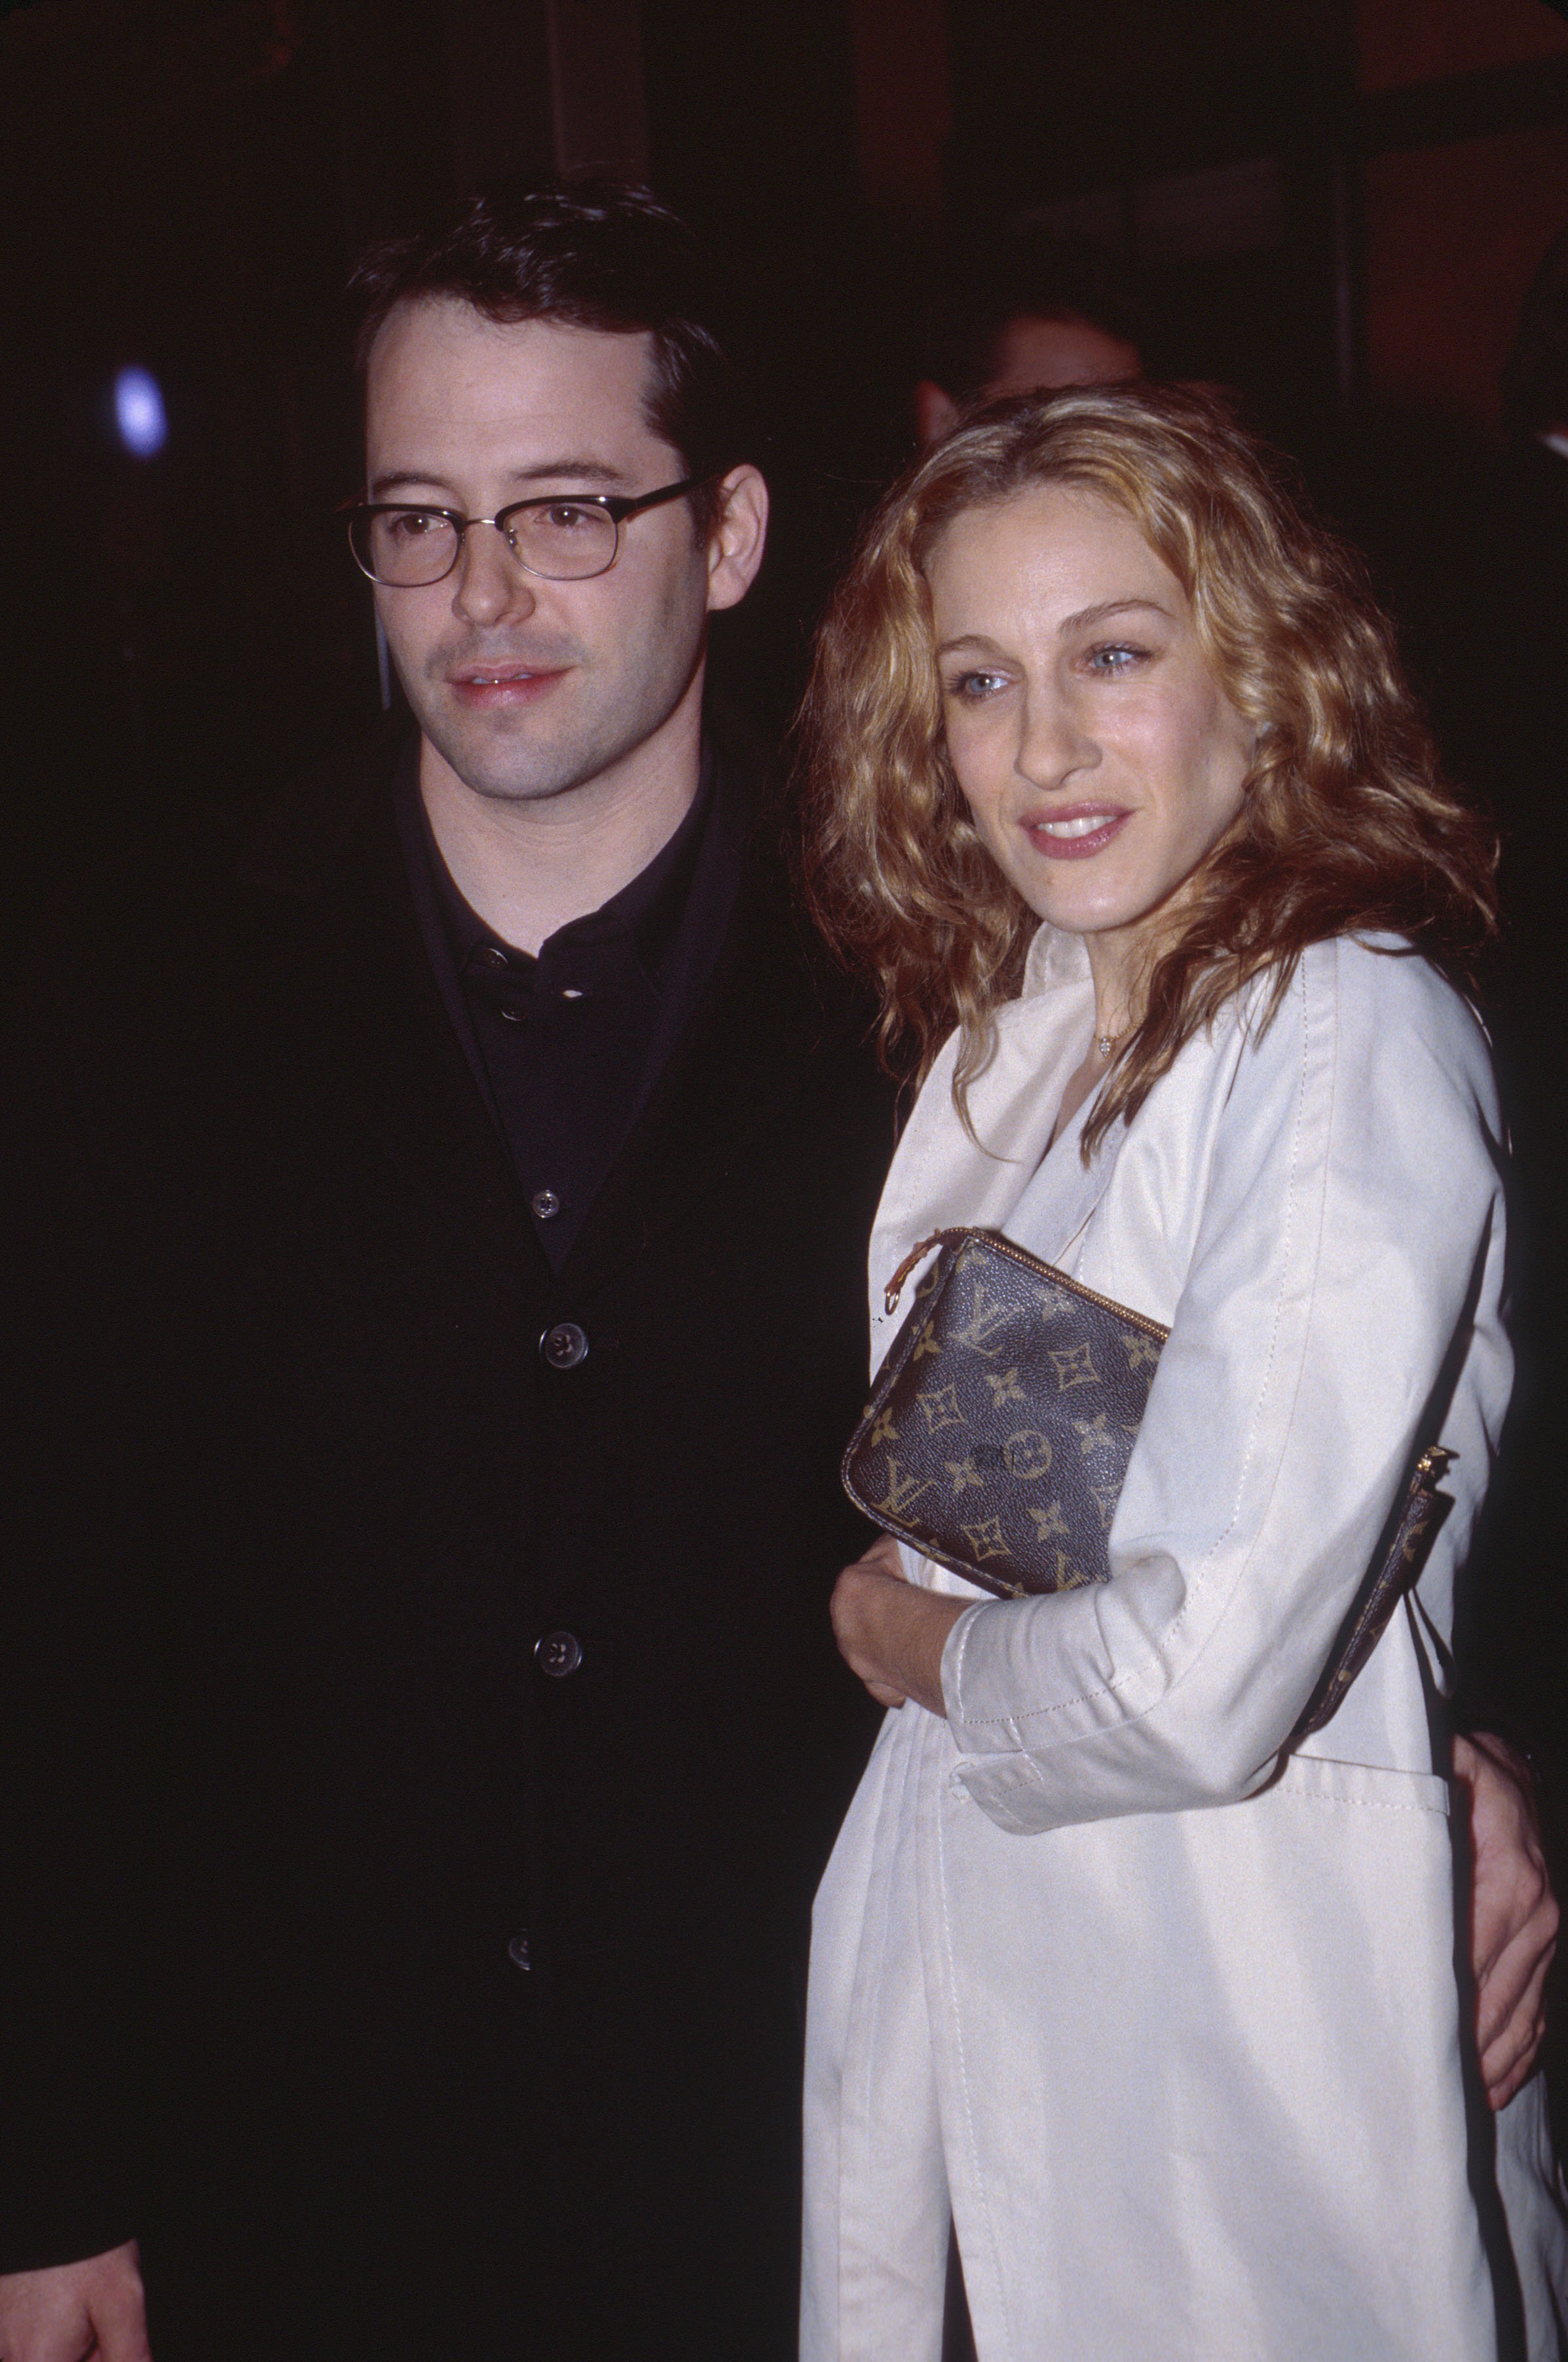 Sarah Jessica Parker and Matthew Broderick in their early days as a couple | Photo: Getty Images